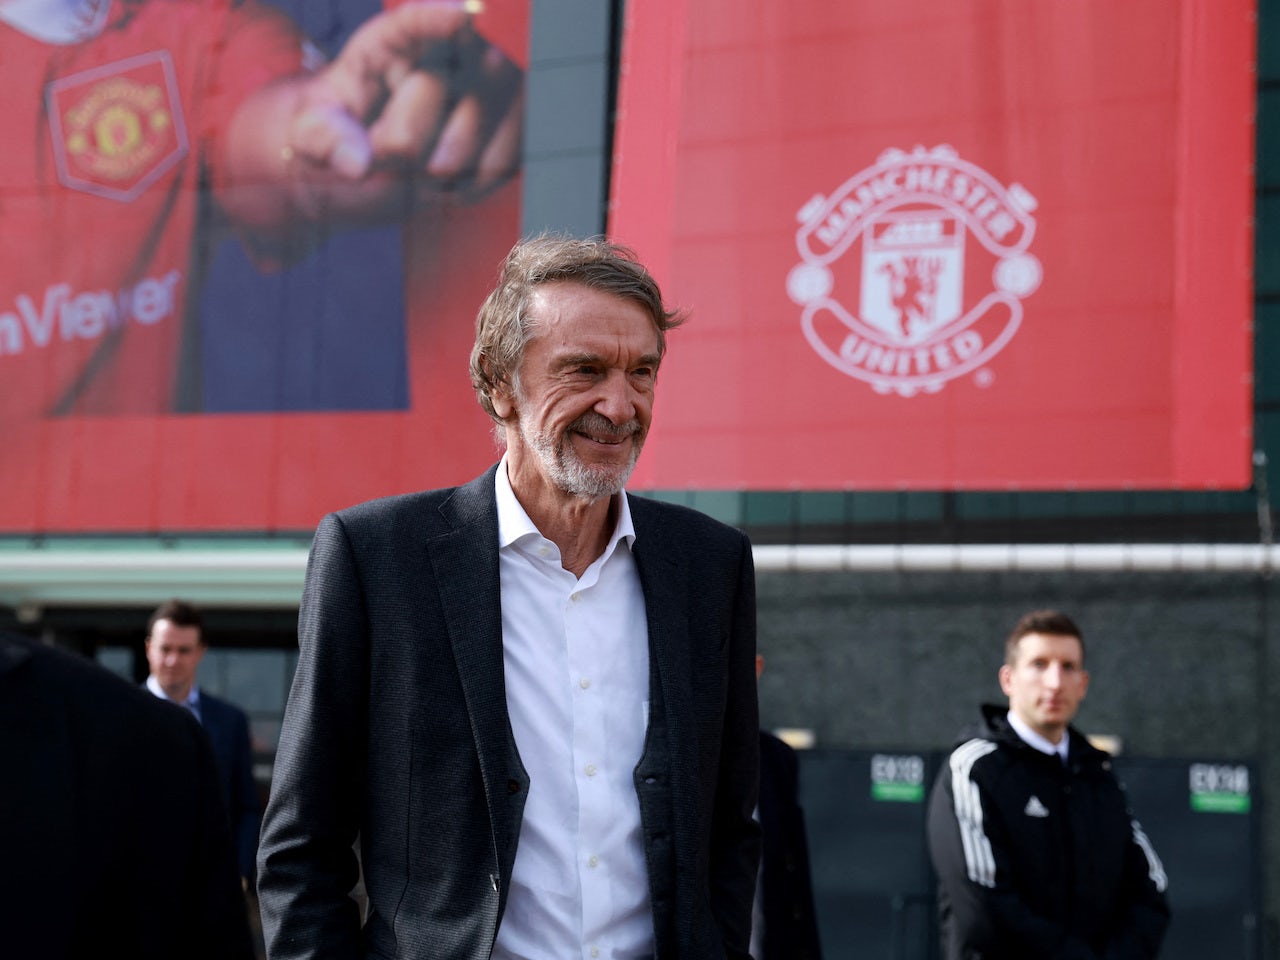 Sir Jim Ratcliffe's Manchester United takeover bid 'dead in the water'